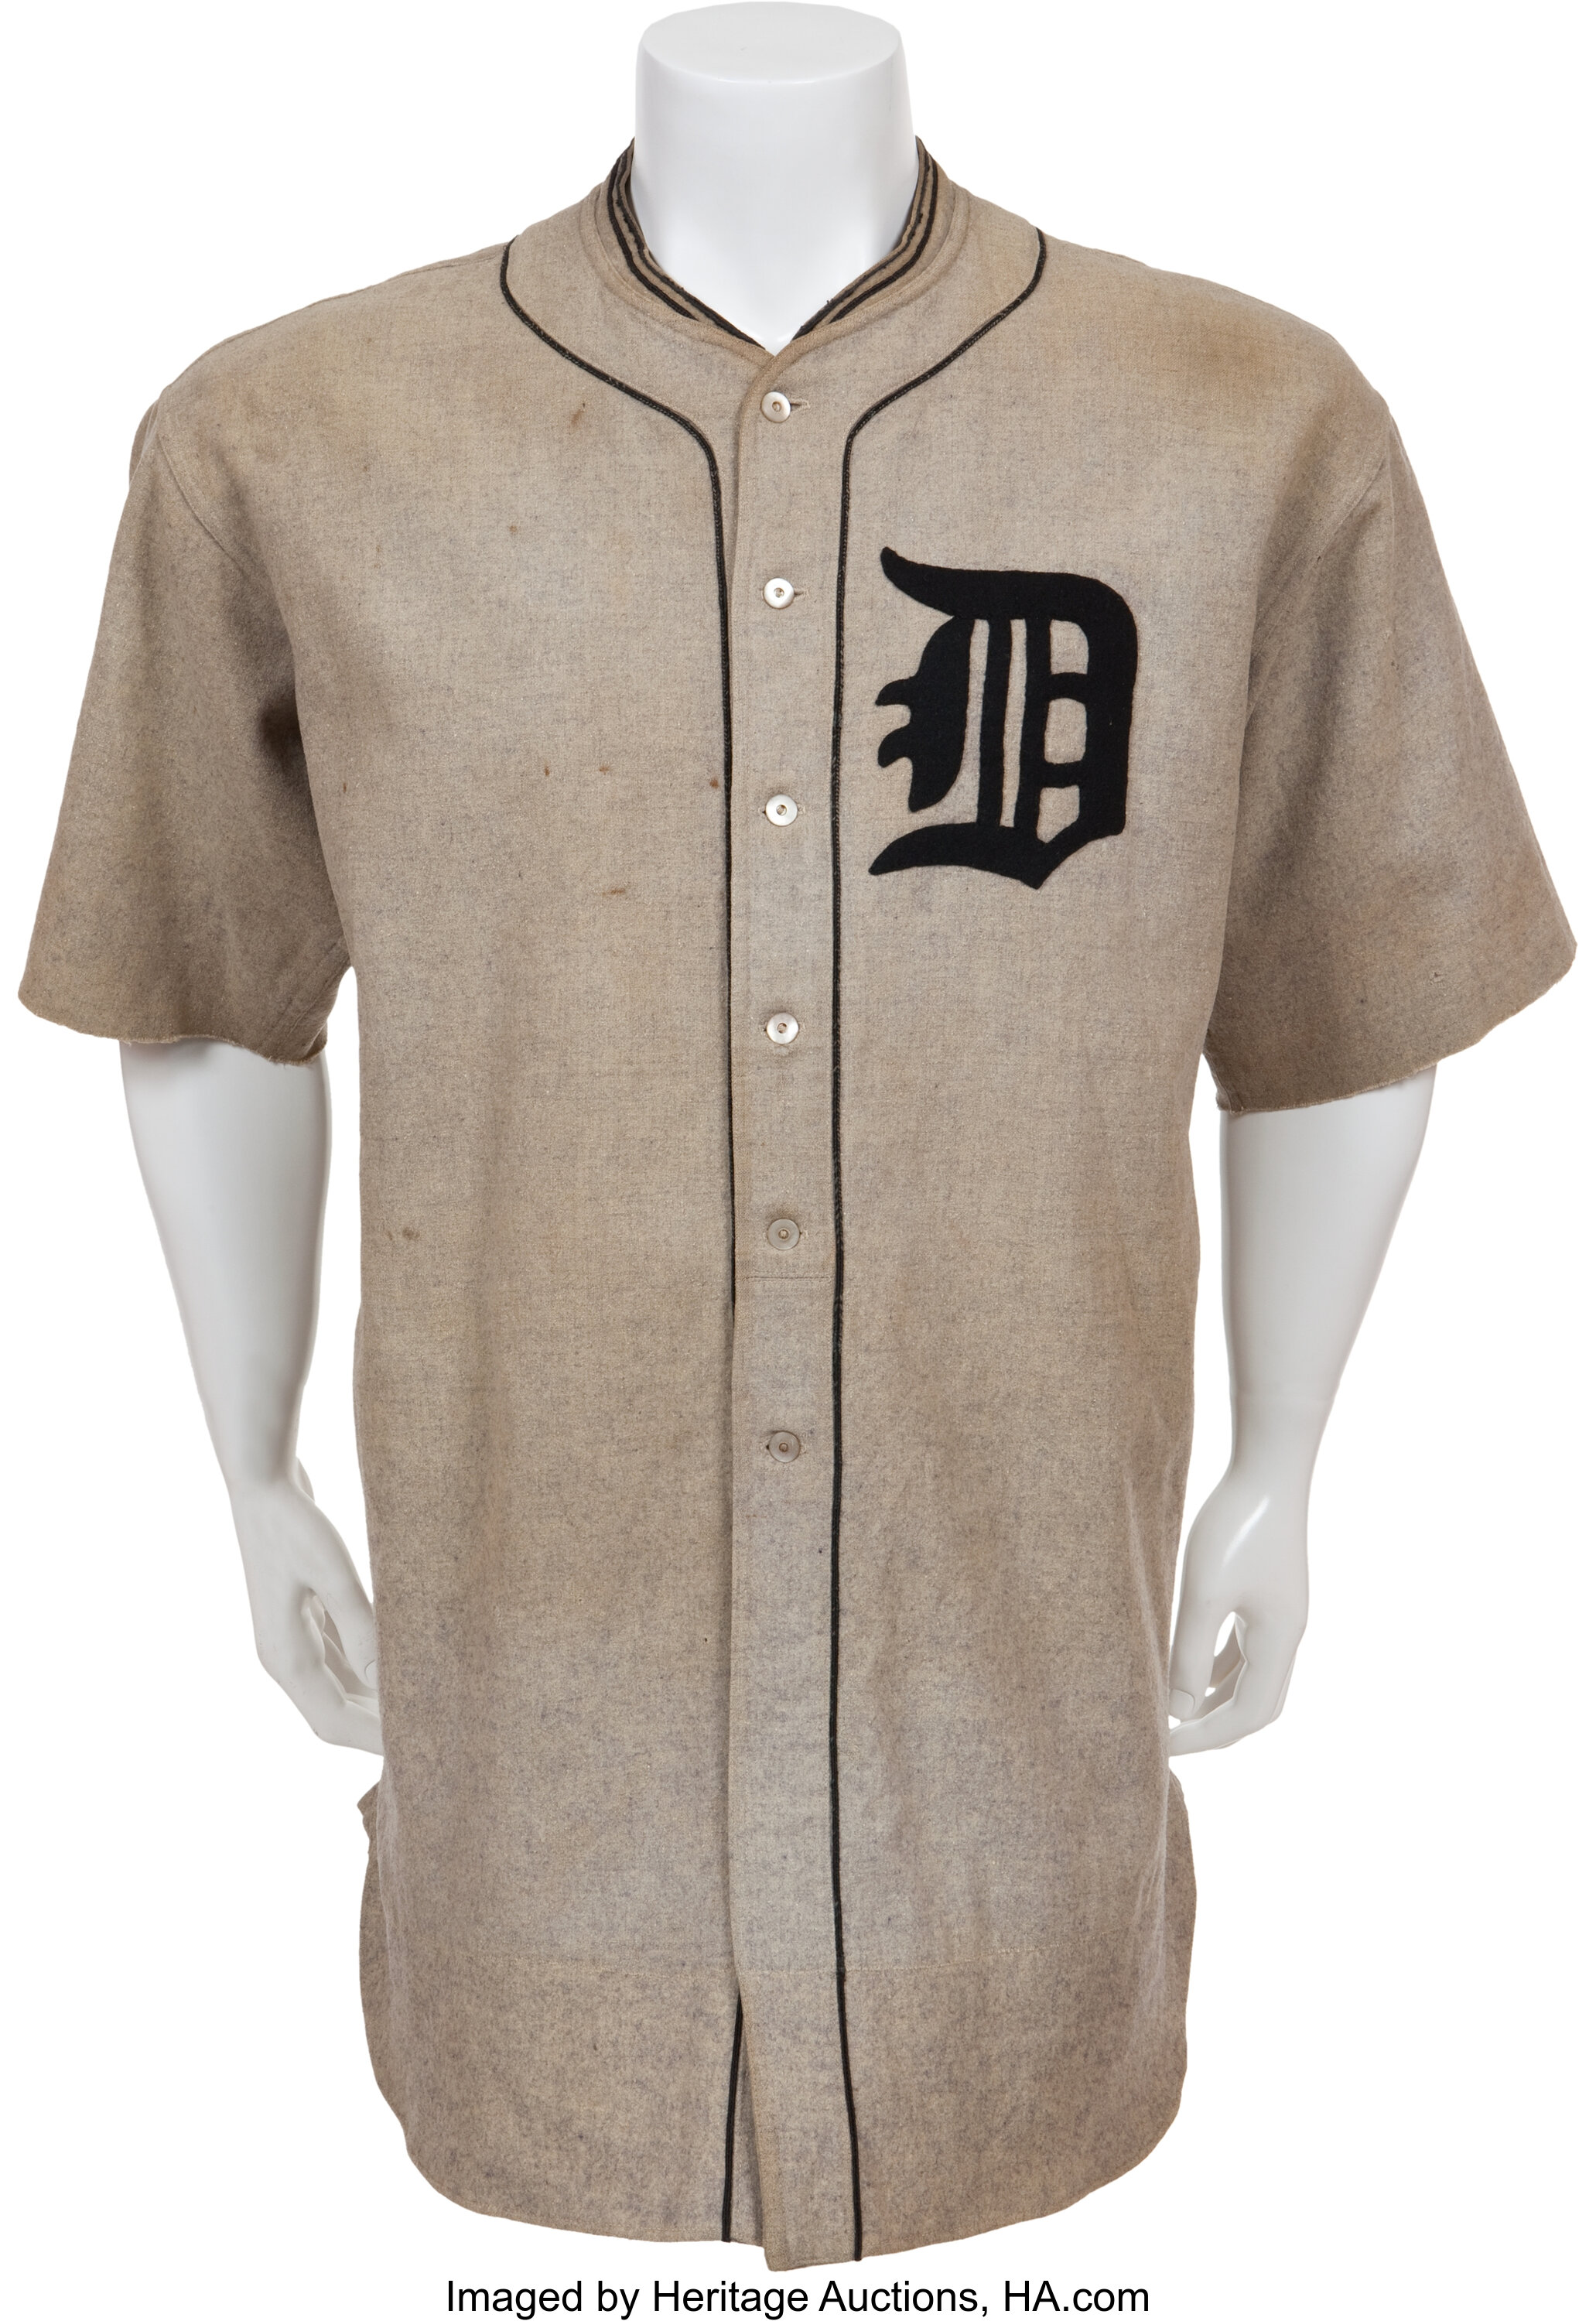 Detroit Tigers on X: Baseball jerseys should come with TC Tuggers